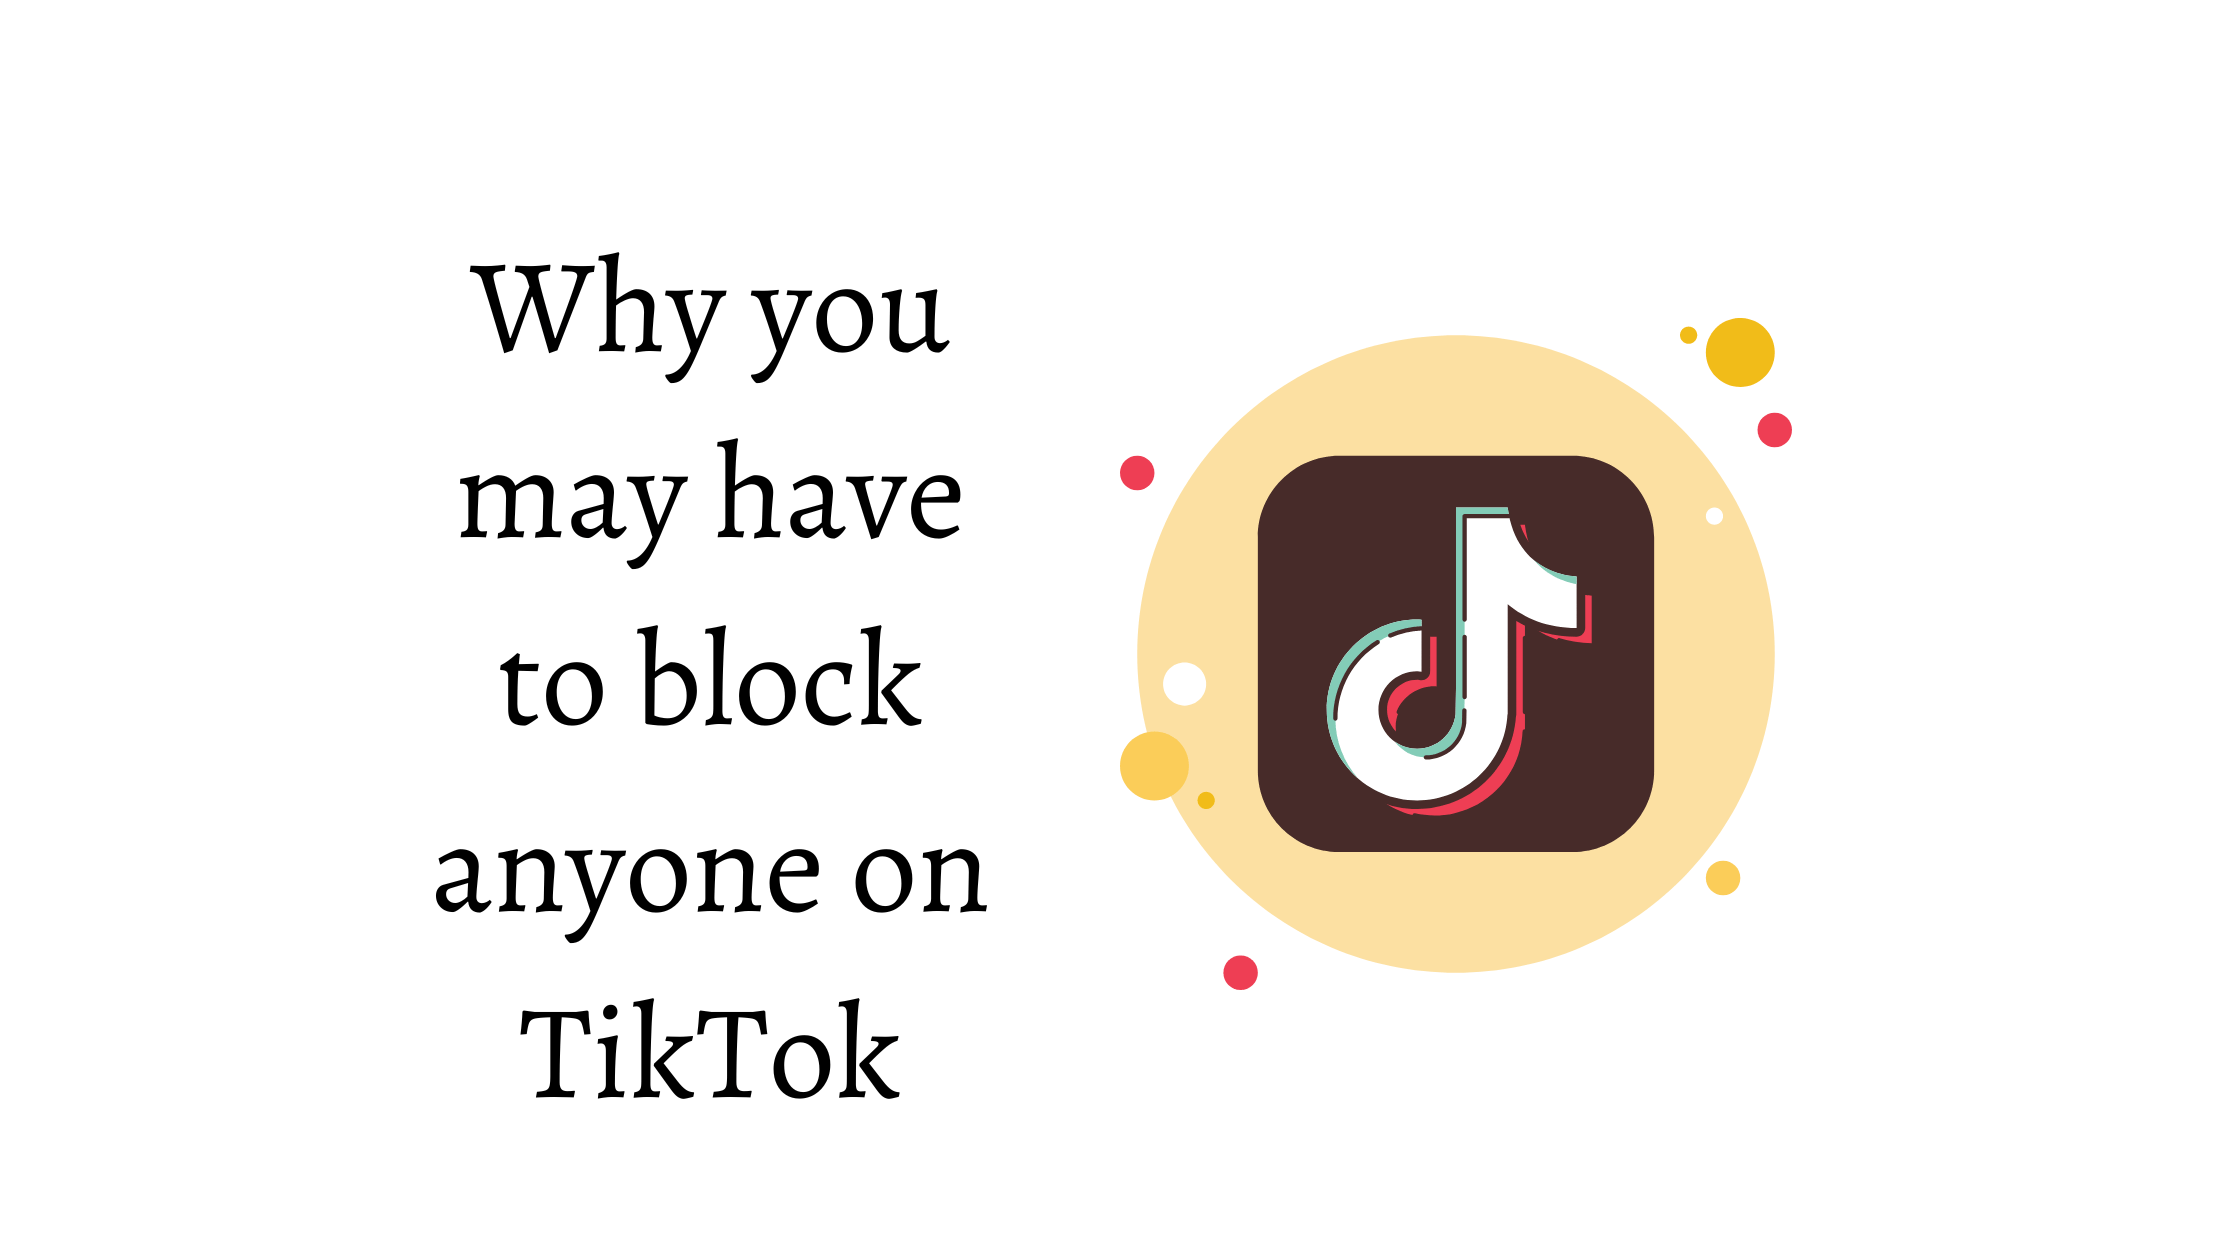 Why you may have to block anyone on TikTok